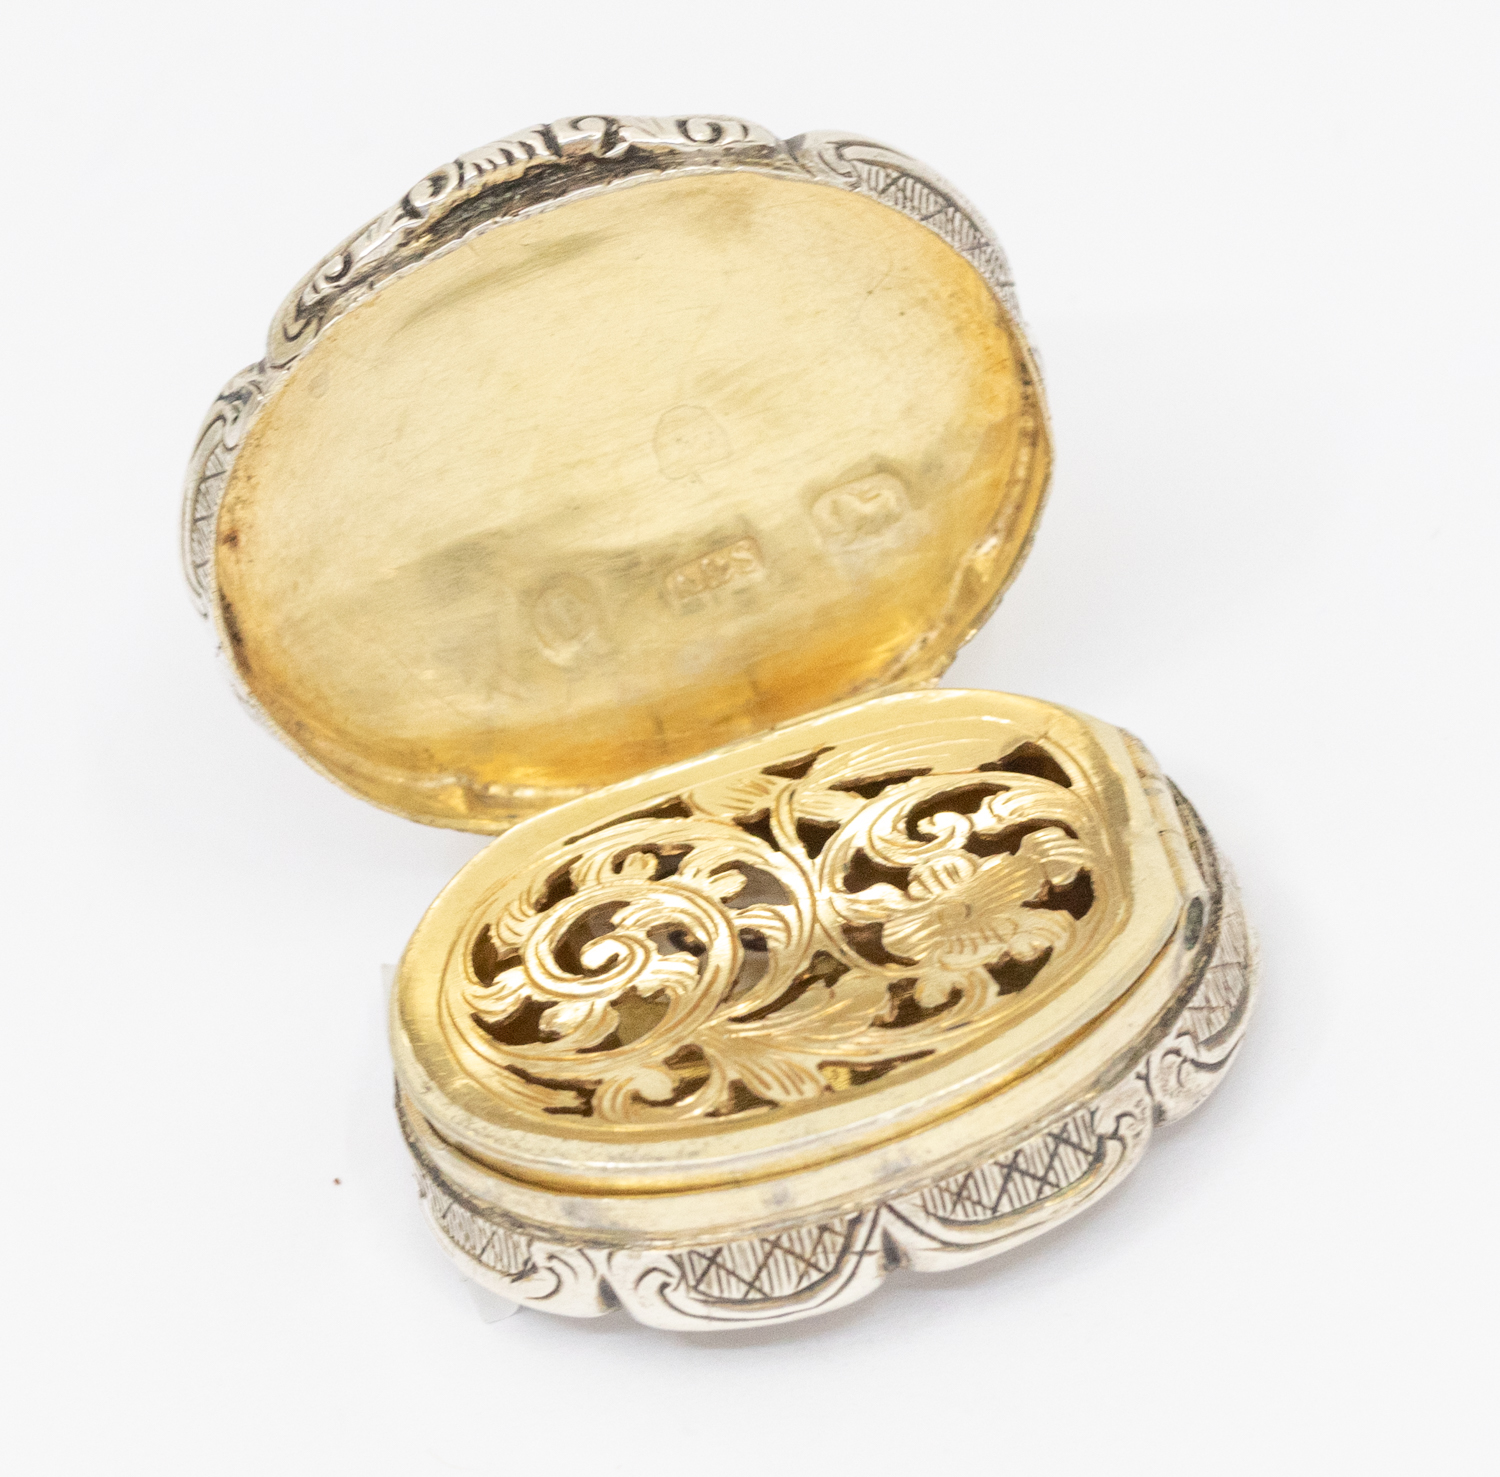 A Victorian silver shaped oval vinaigrette, scalloped border, engraved with flowers and foliage, the - Image 2 of 3